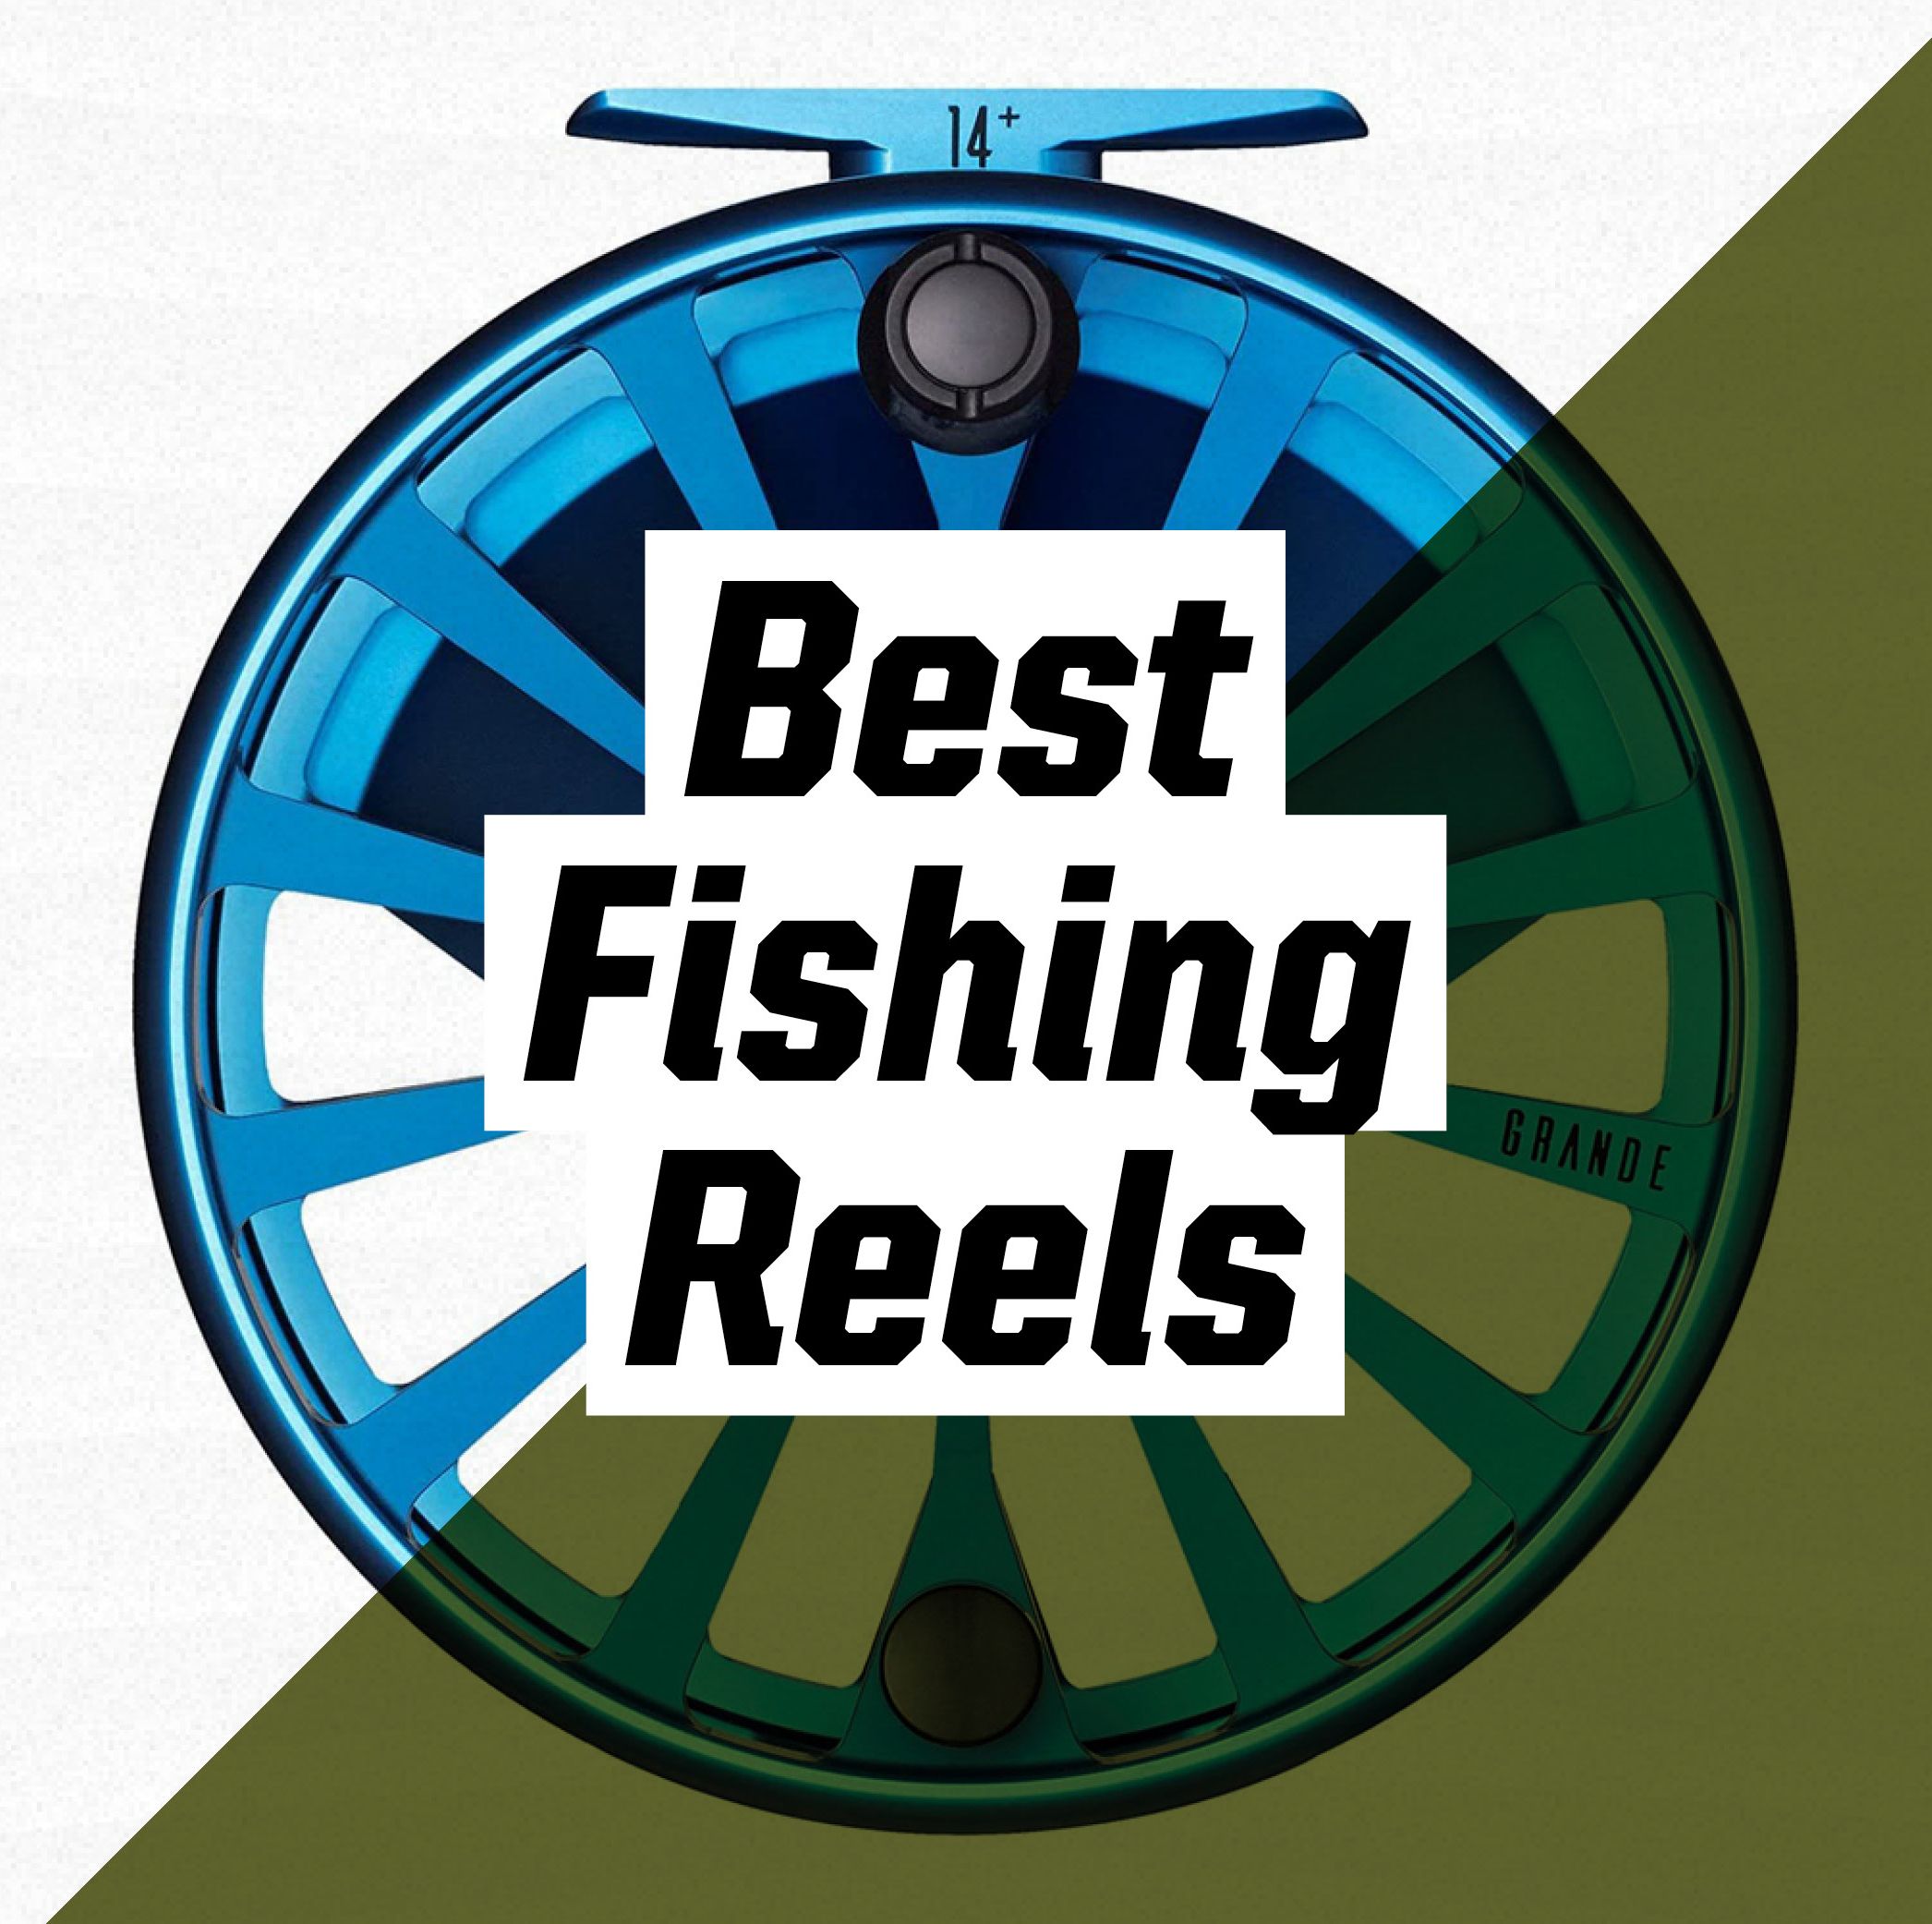 Land a Trophy with These Expert-Approved Fishing Reels